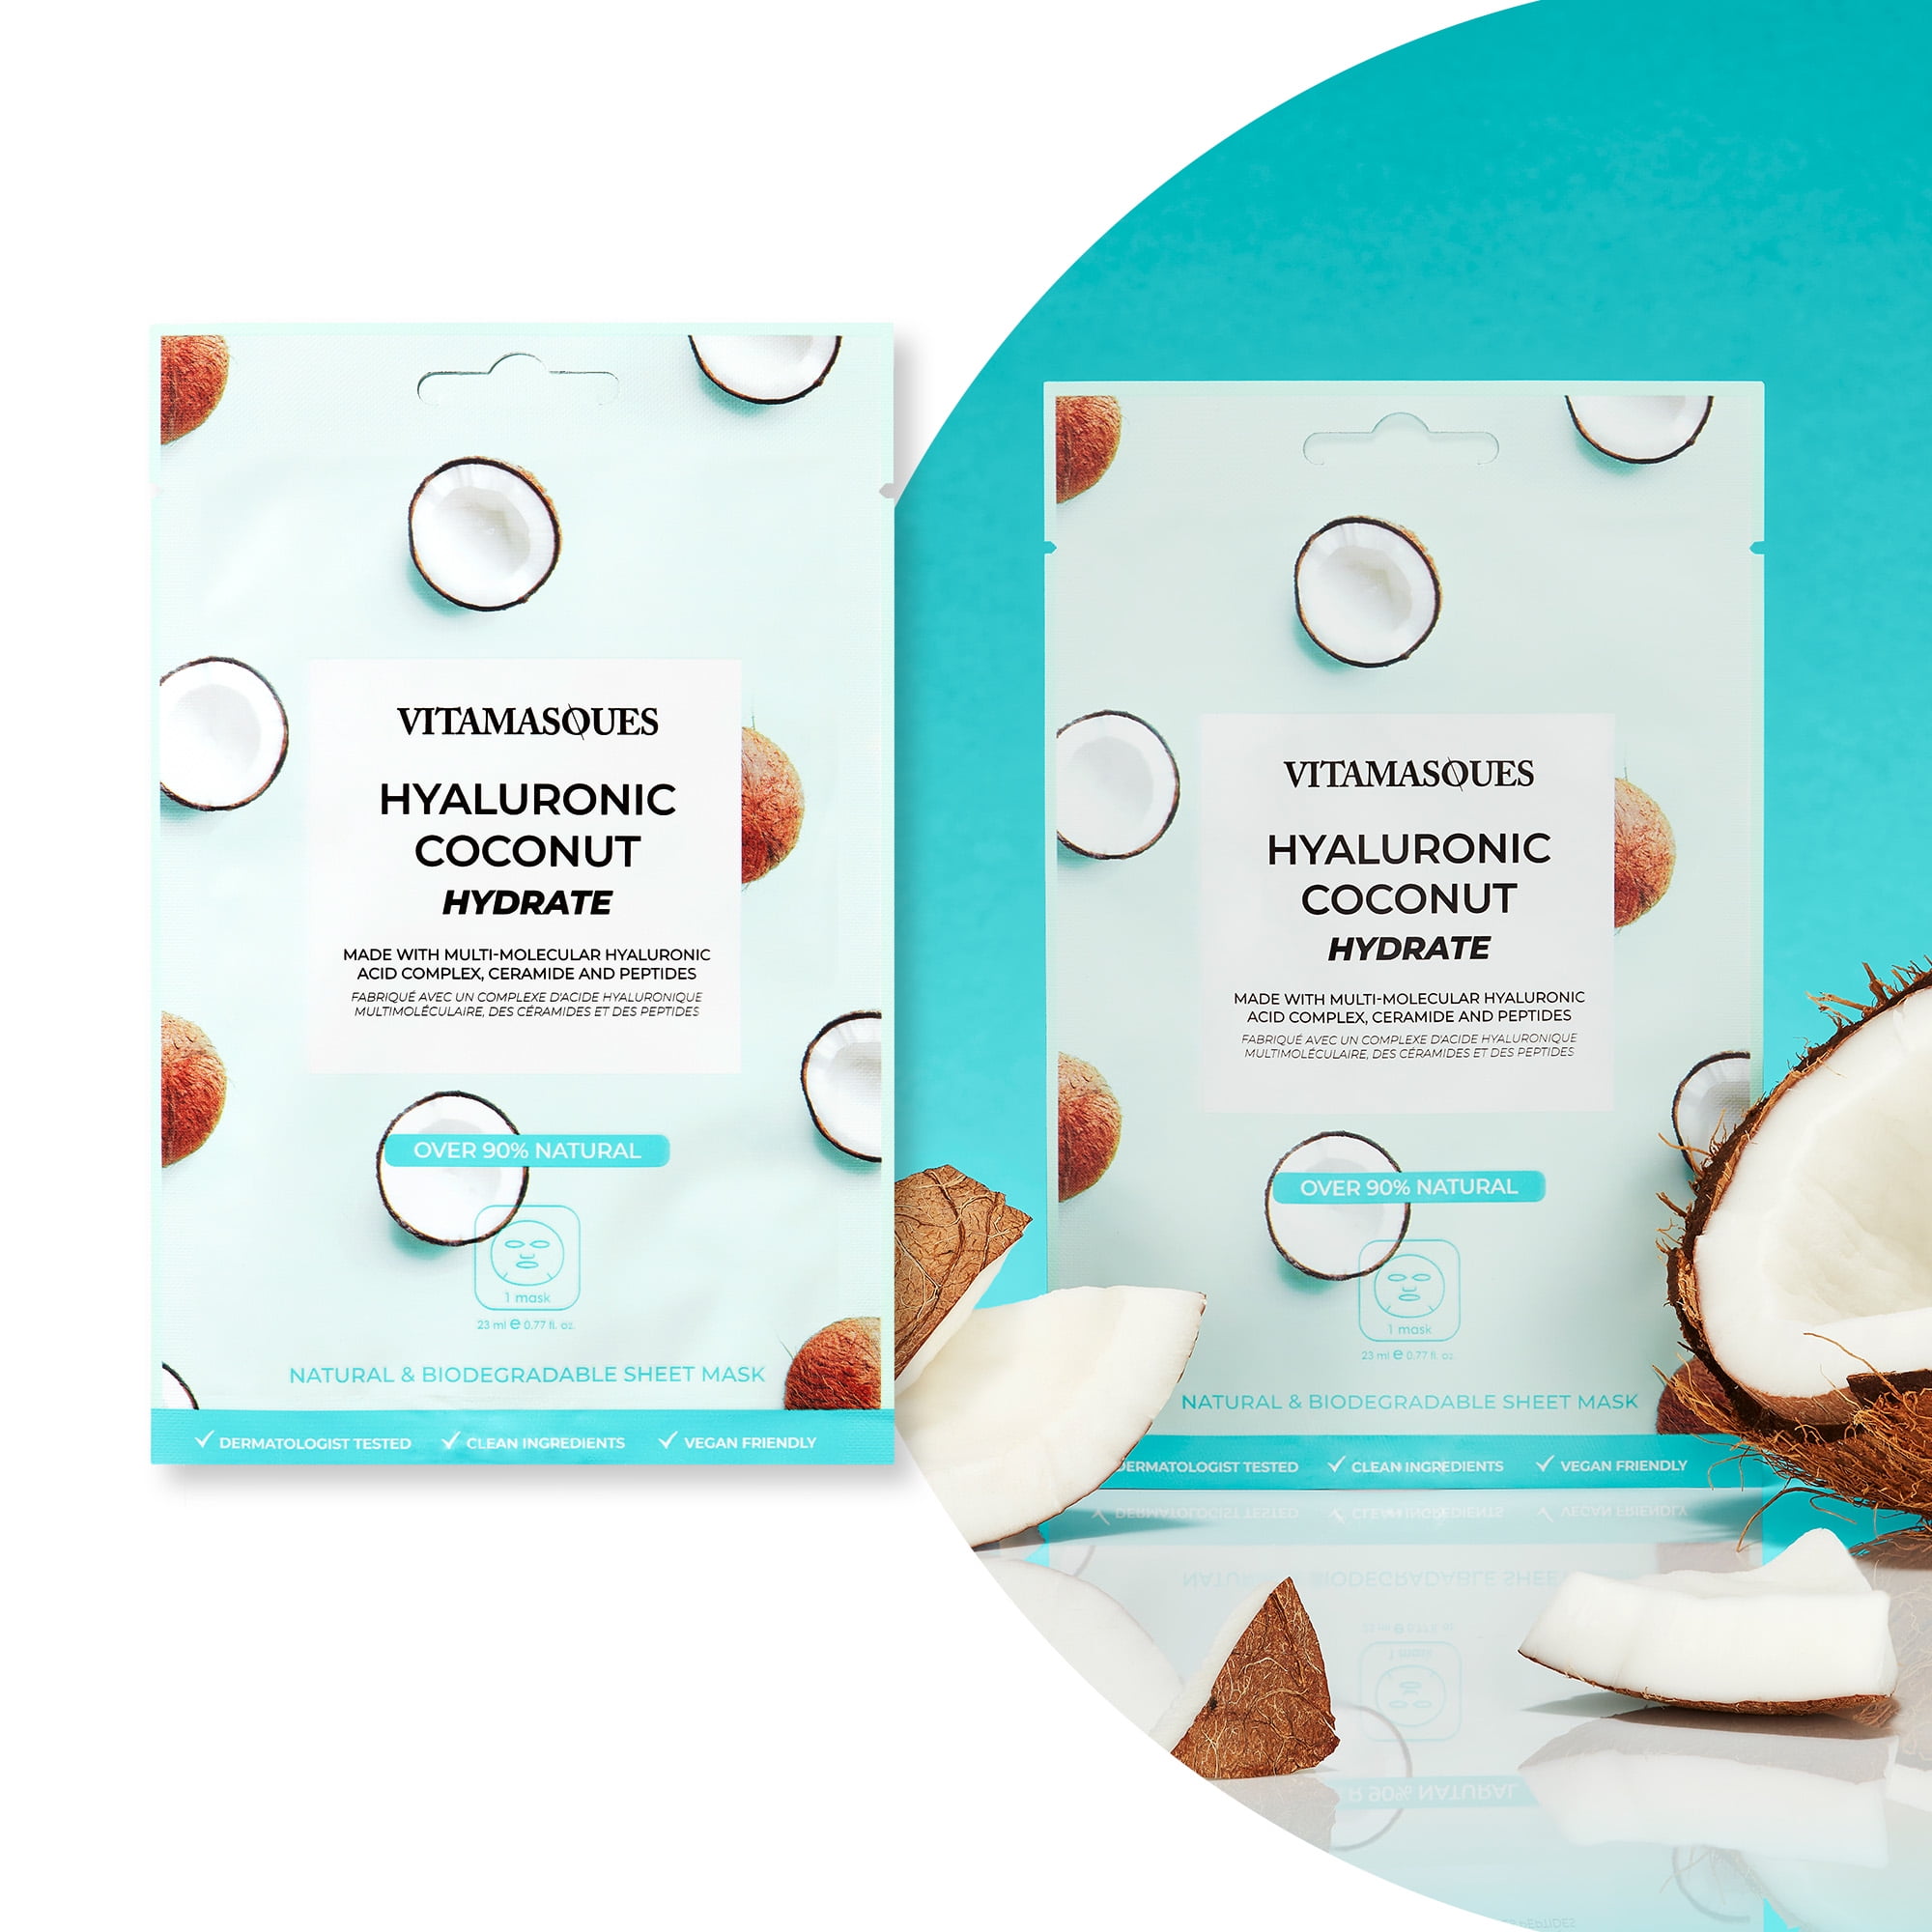 Vitamasques Biodegradable Coconut Face Mask, Hydrating Hyaluronic Acid, One Sheet Mask